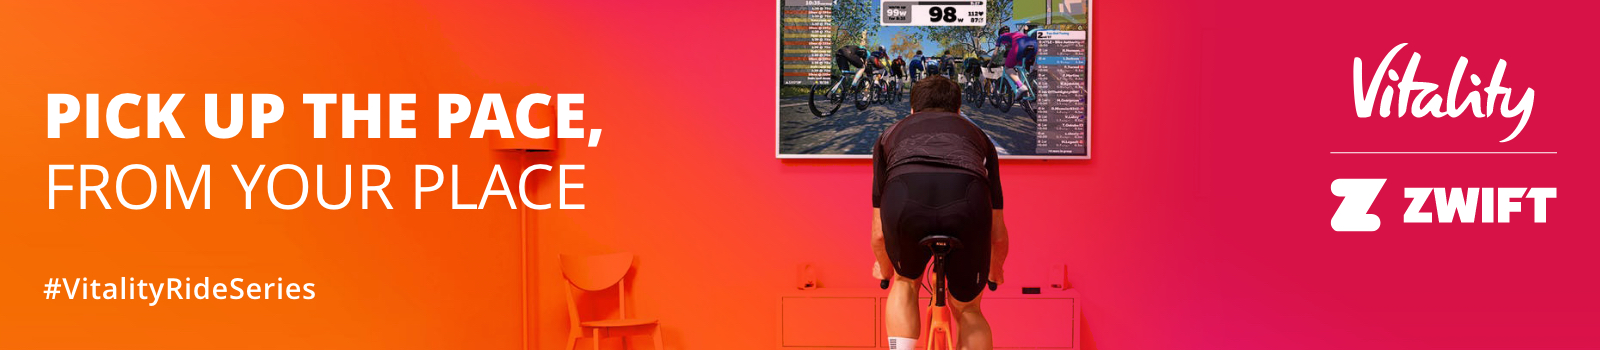 Vitality has partnered with Zwift